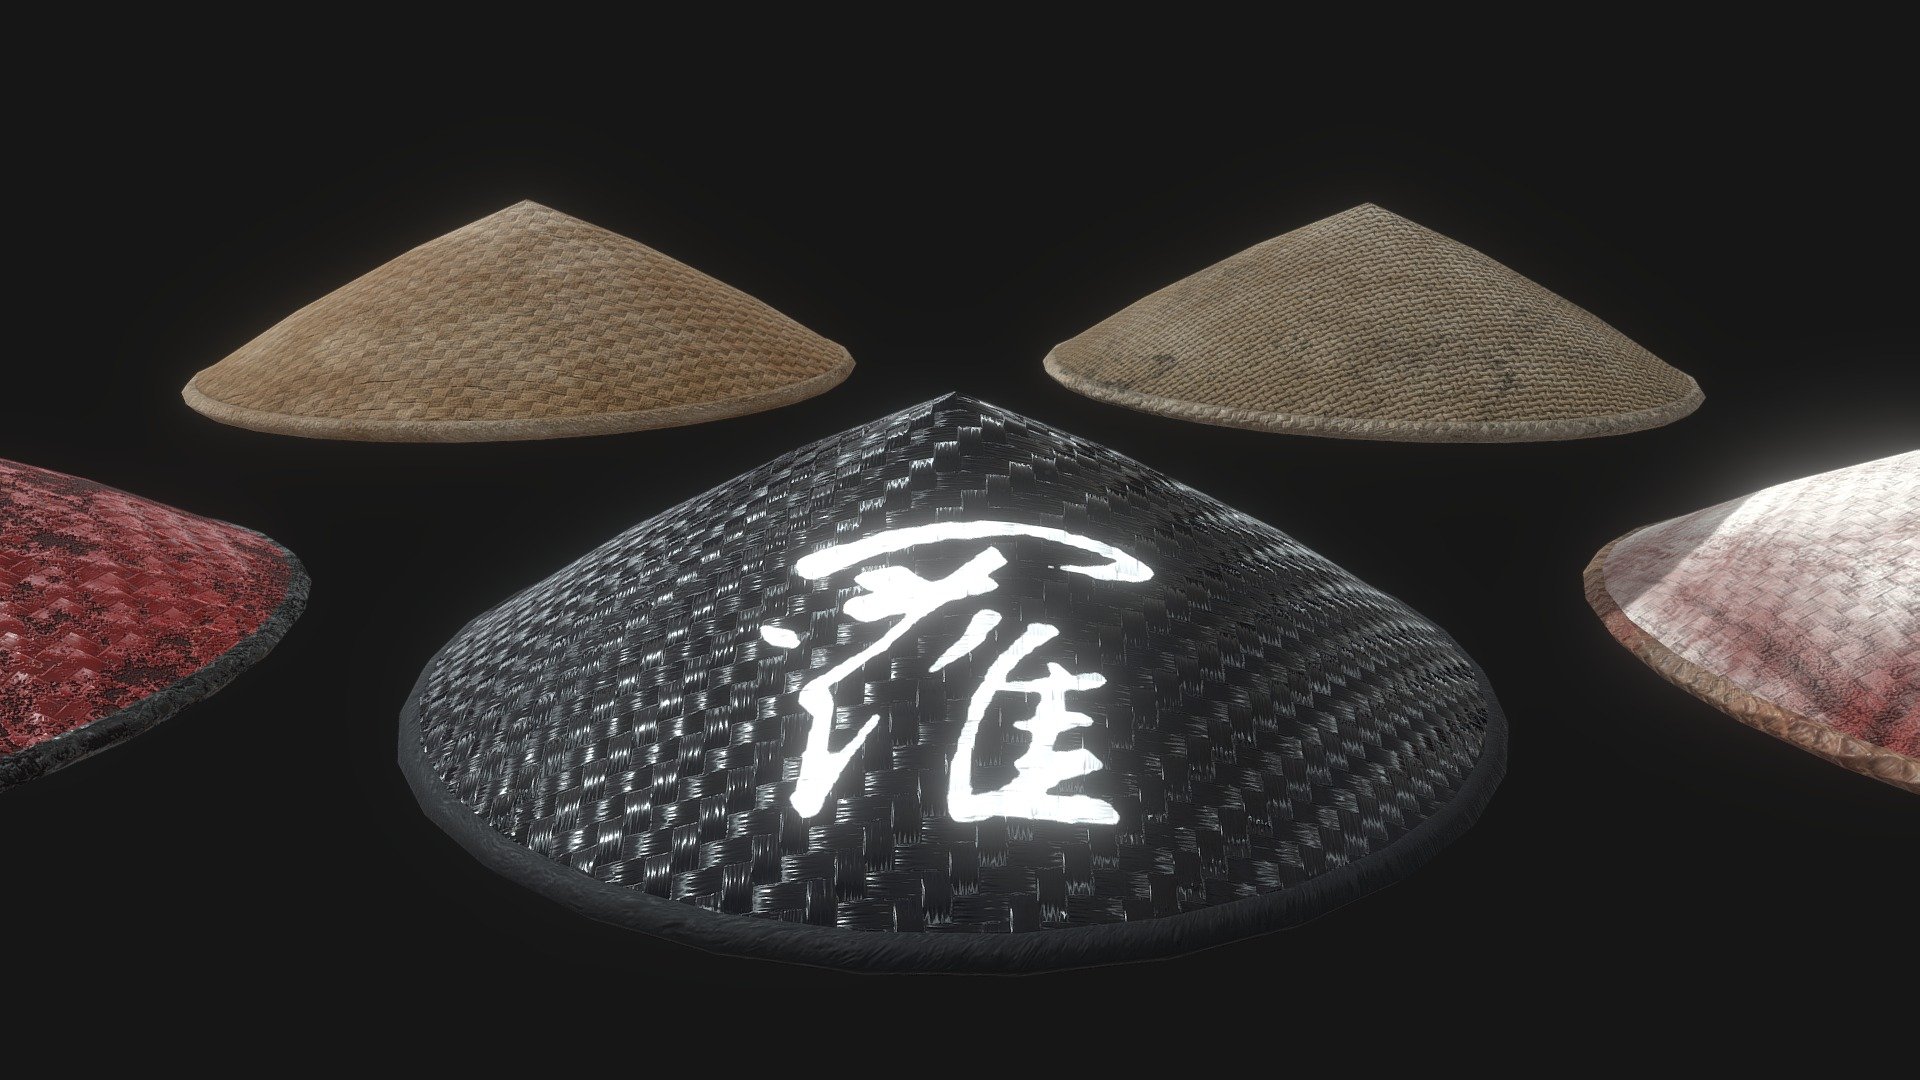 A set of ancient Asian Rattan Hats!

Cheap because the Samurai skin is downloadable for free on my page!

Designed for games in Low-poly PBR including Albedo, Normal, Metallic, AO, and Roughness 2K textures.

Included Skins (Texture sets) - Peasant, Slave, Royal, Ancient, Samurai

640 Triangles (One Hat) 3d model